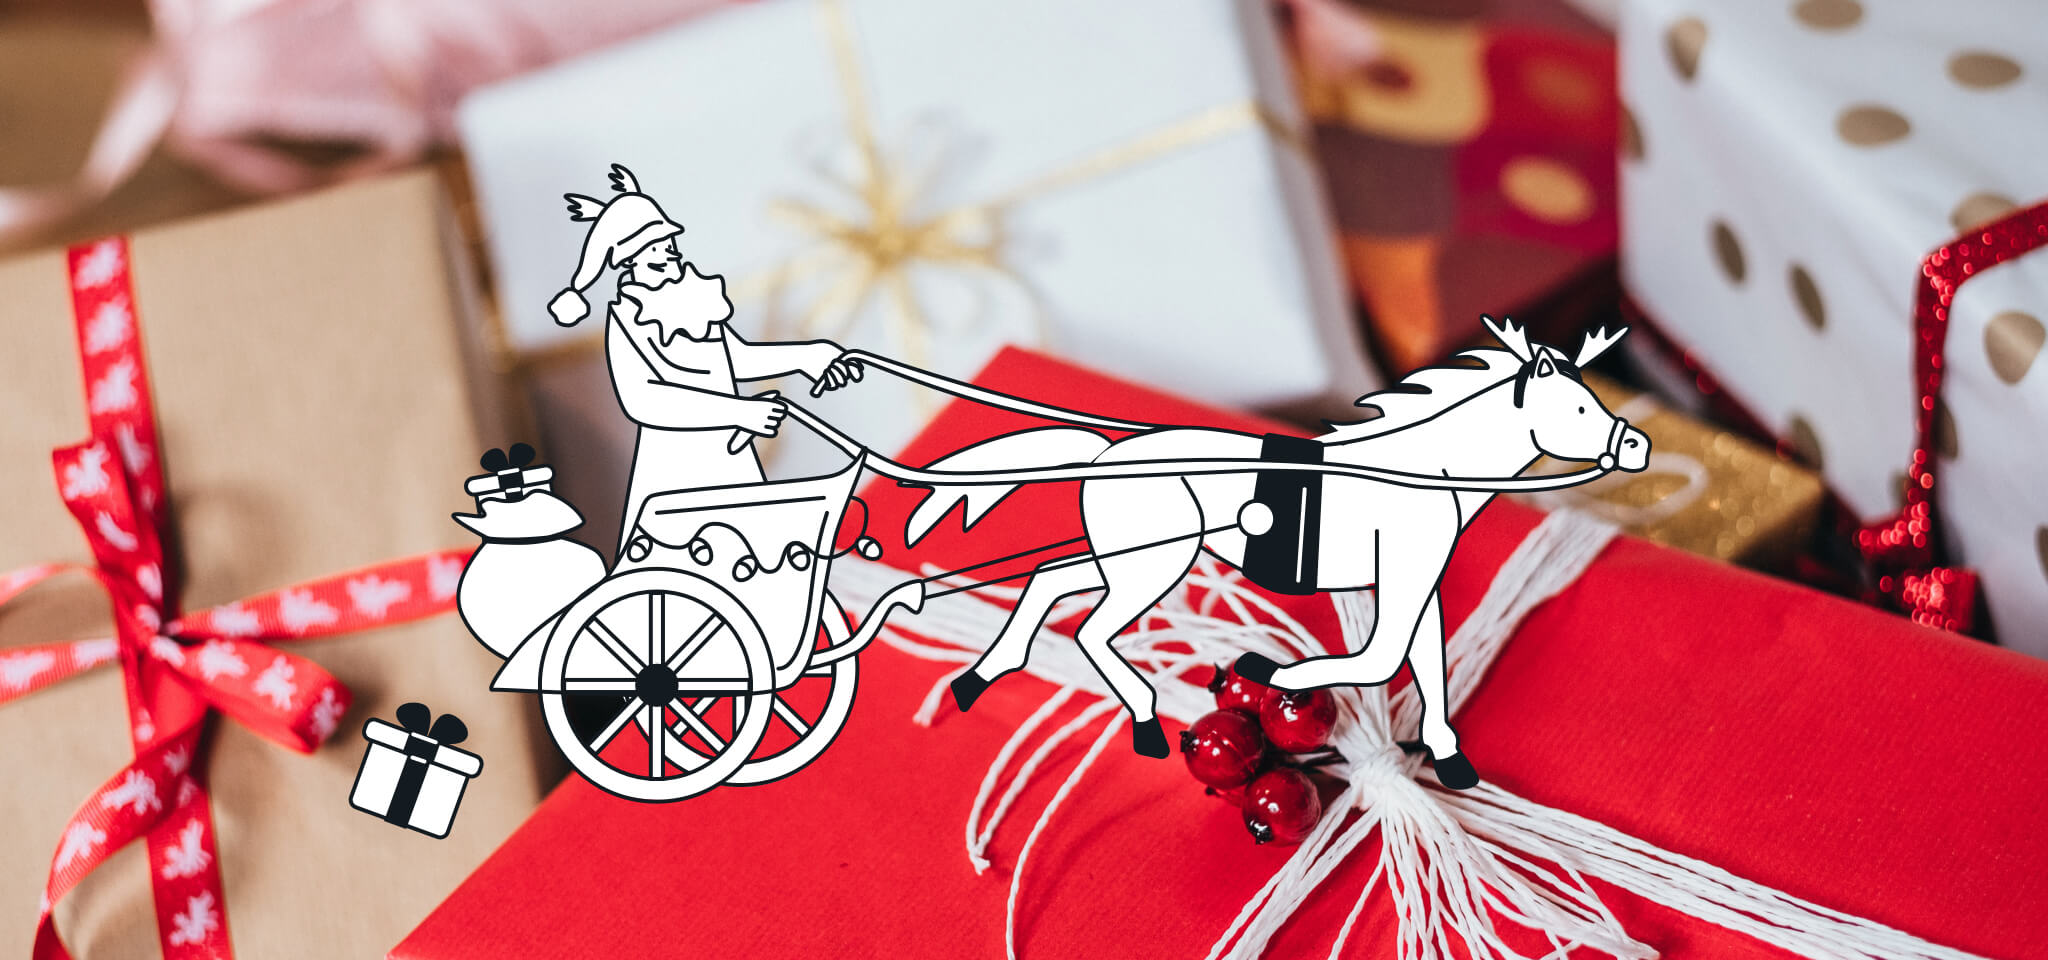 Hermes riding Santa's sleigh in front of presents